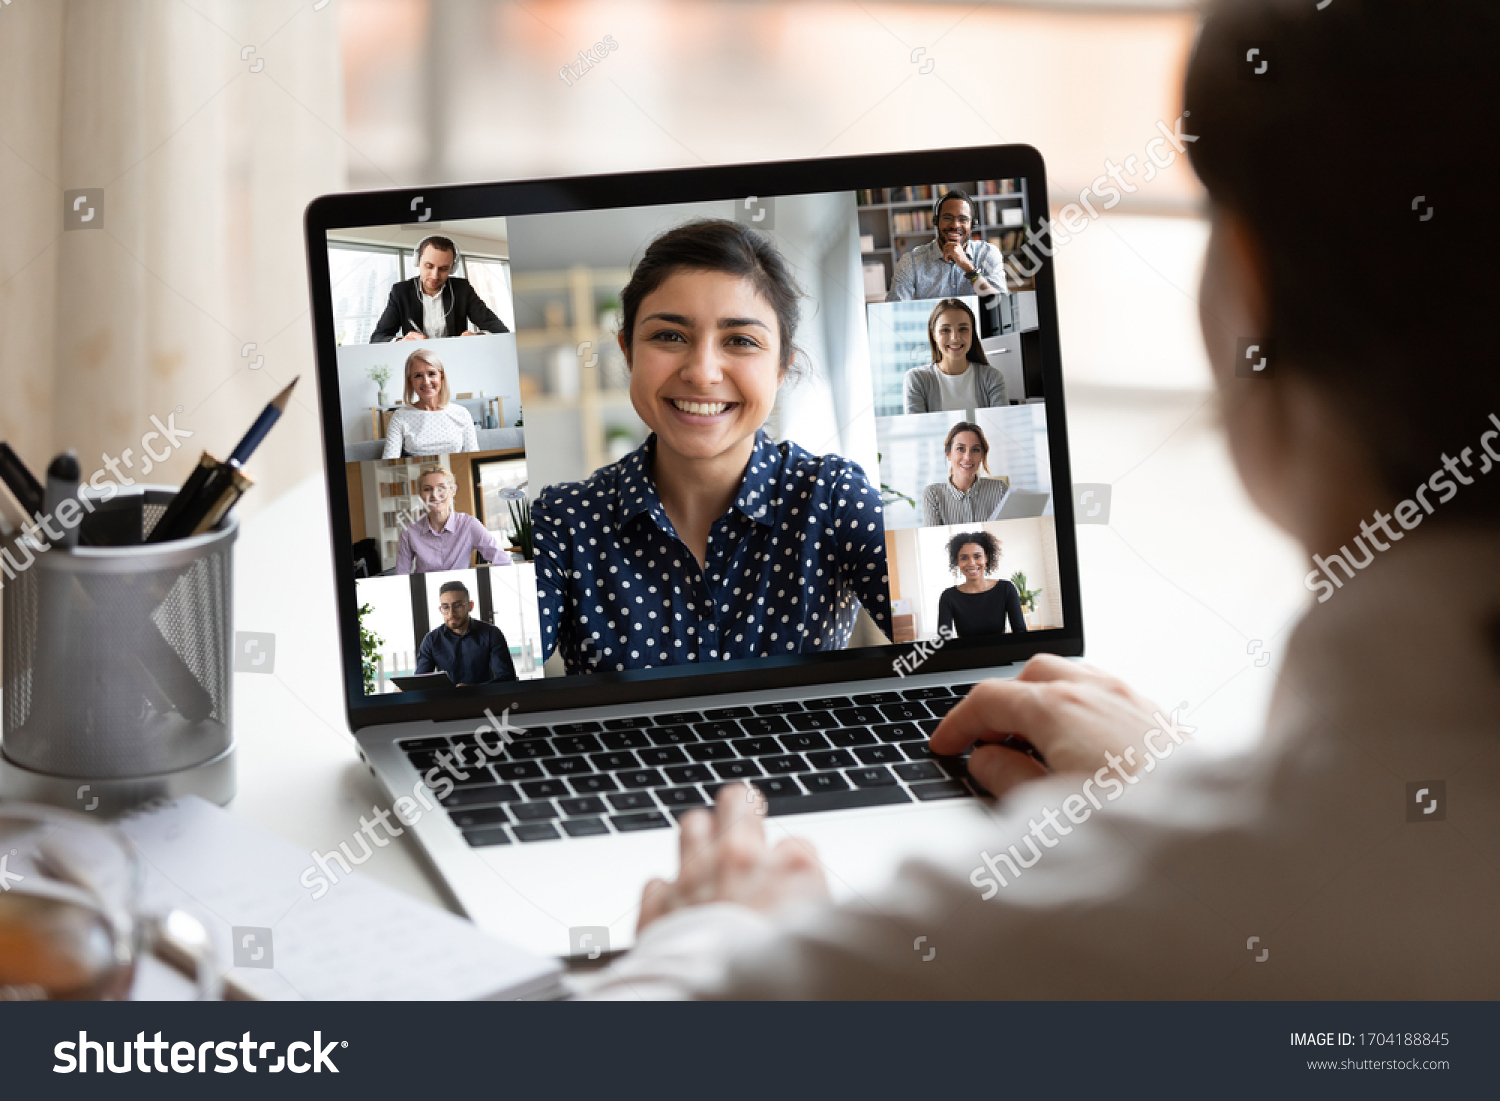 Woman sit at desk looking at computer screen where collage of diverse people webcam view. Indian ethnicity young woman lead video call distant chat, group of different mates using videoconference app #1704188845